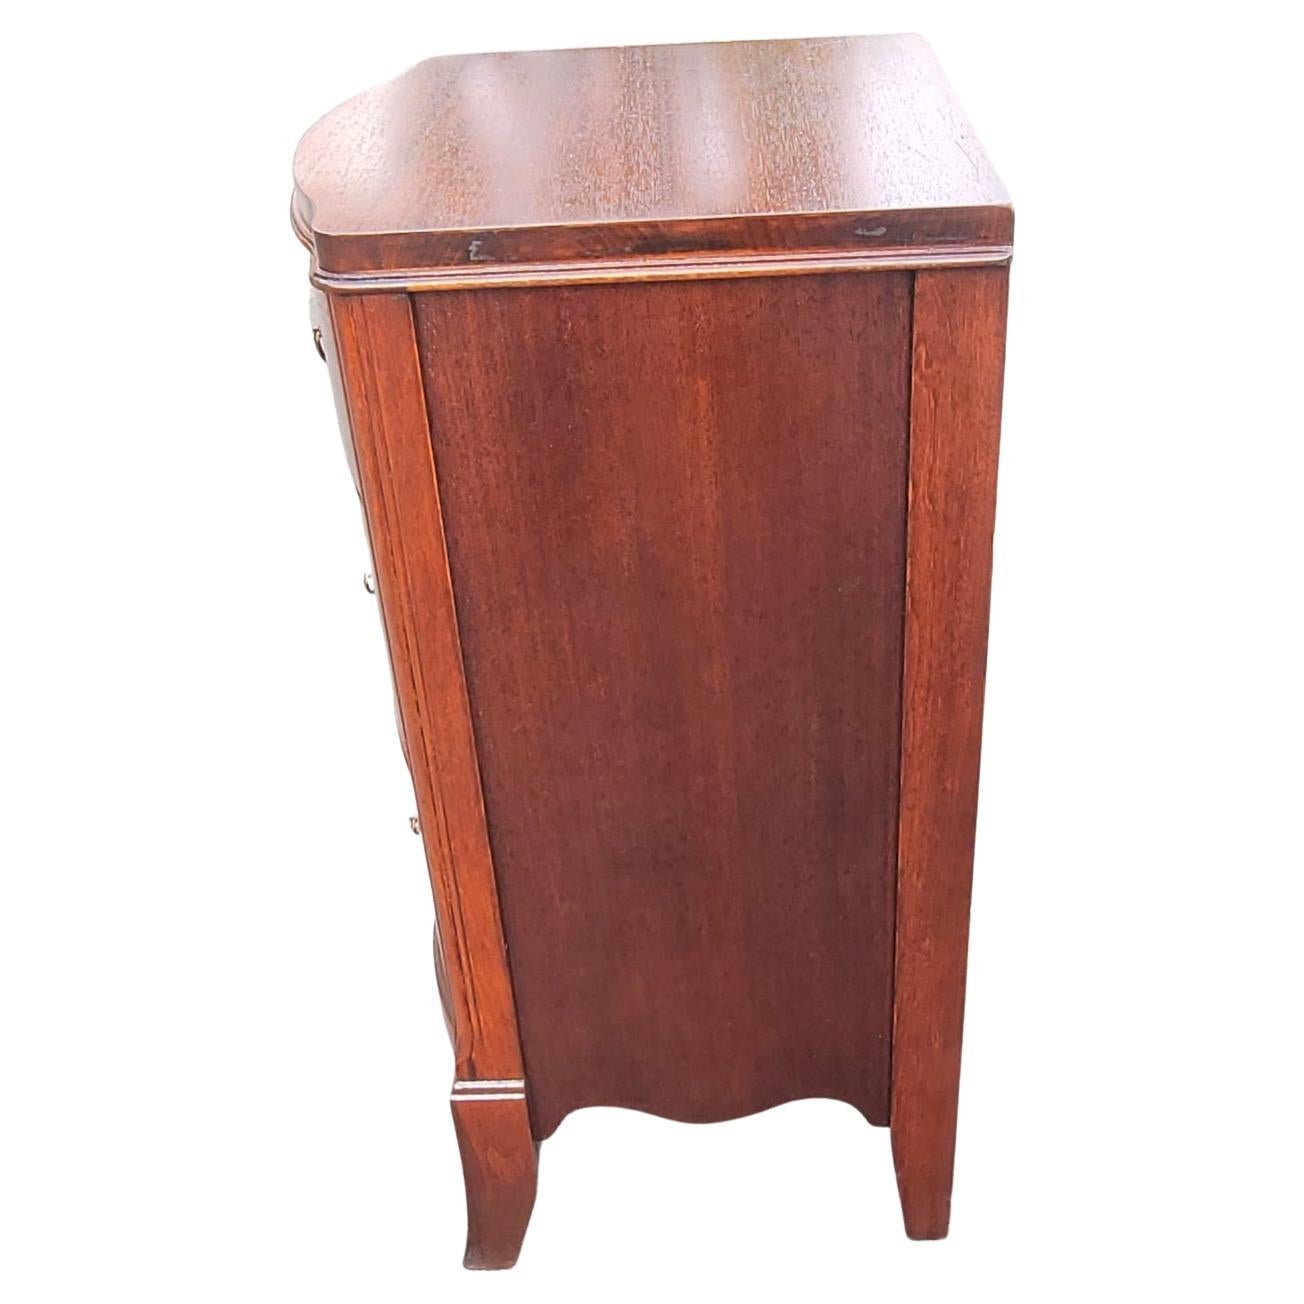 Brass 19th Century Federal Bowfront Mahogany Bedside Chest Nightstand For Sale